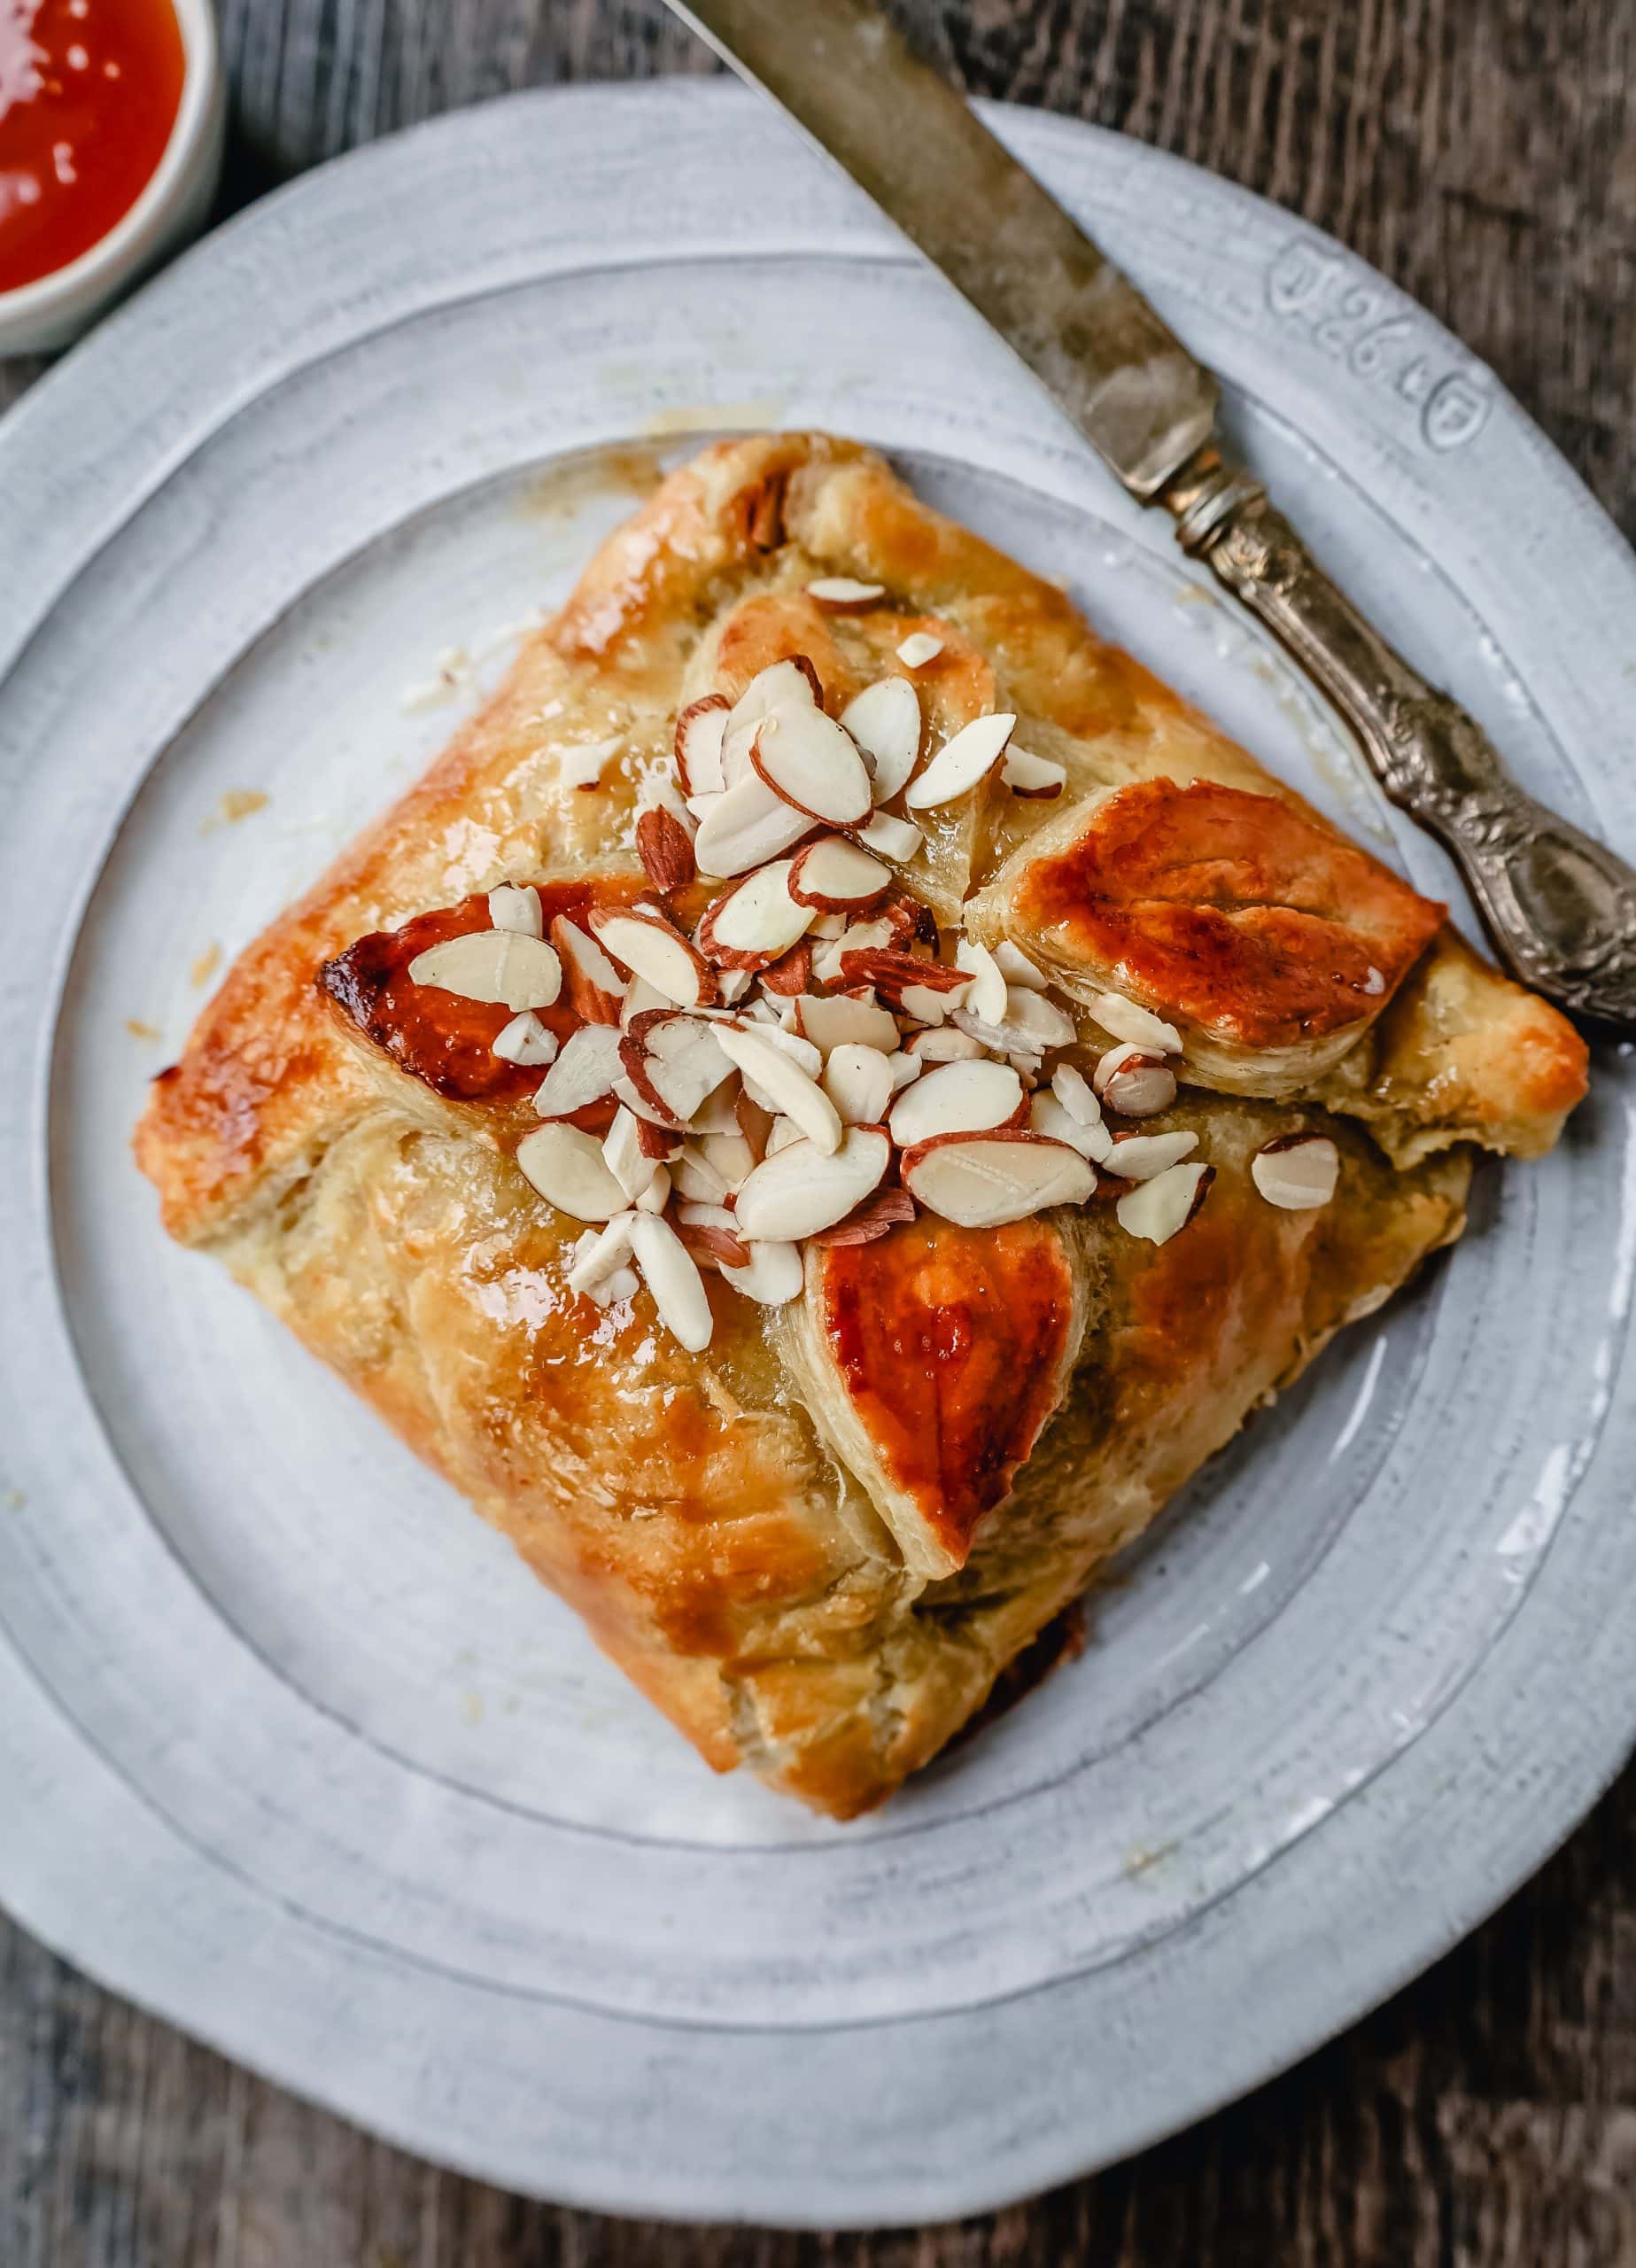 Honey Almond Puff Pastry Wrapped Brie Brie cheese wrapped in buttery puff pastry with local honey and sliced almonds. This is a sweet and salty festive party appetizer.